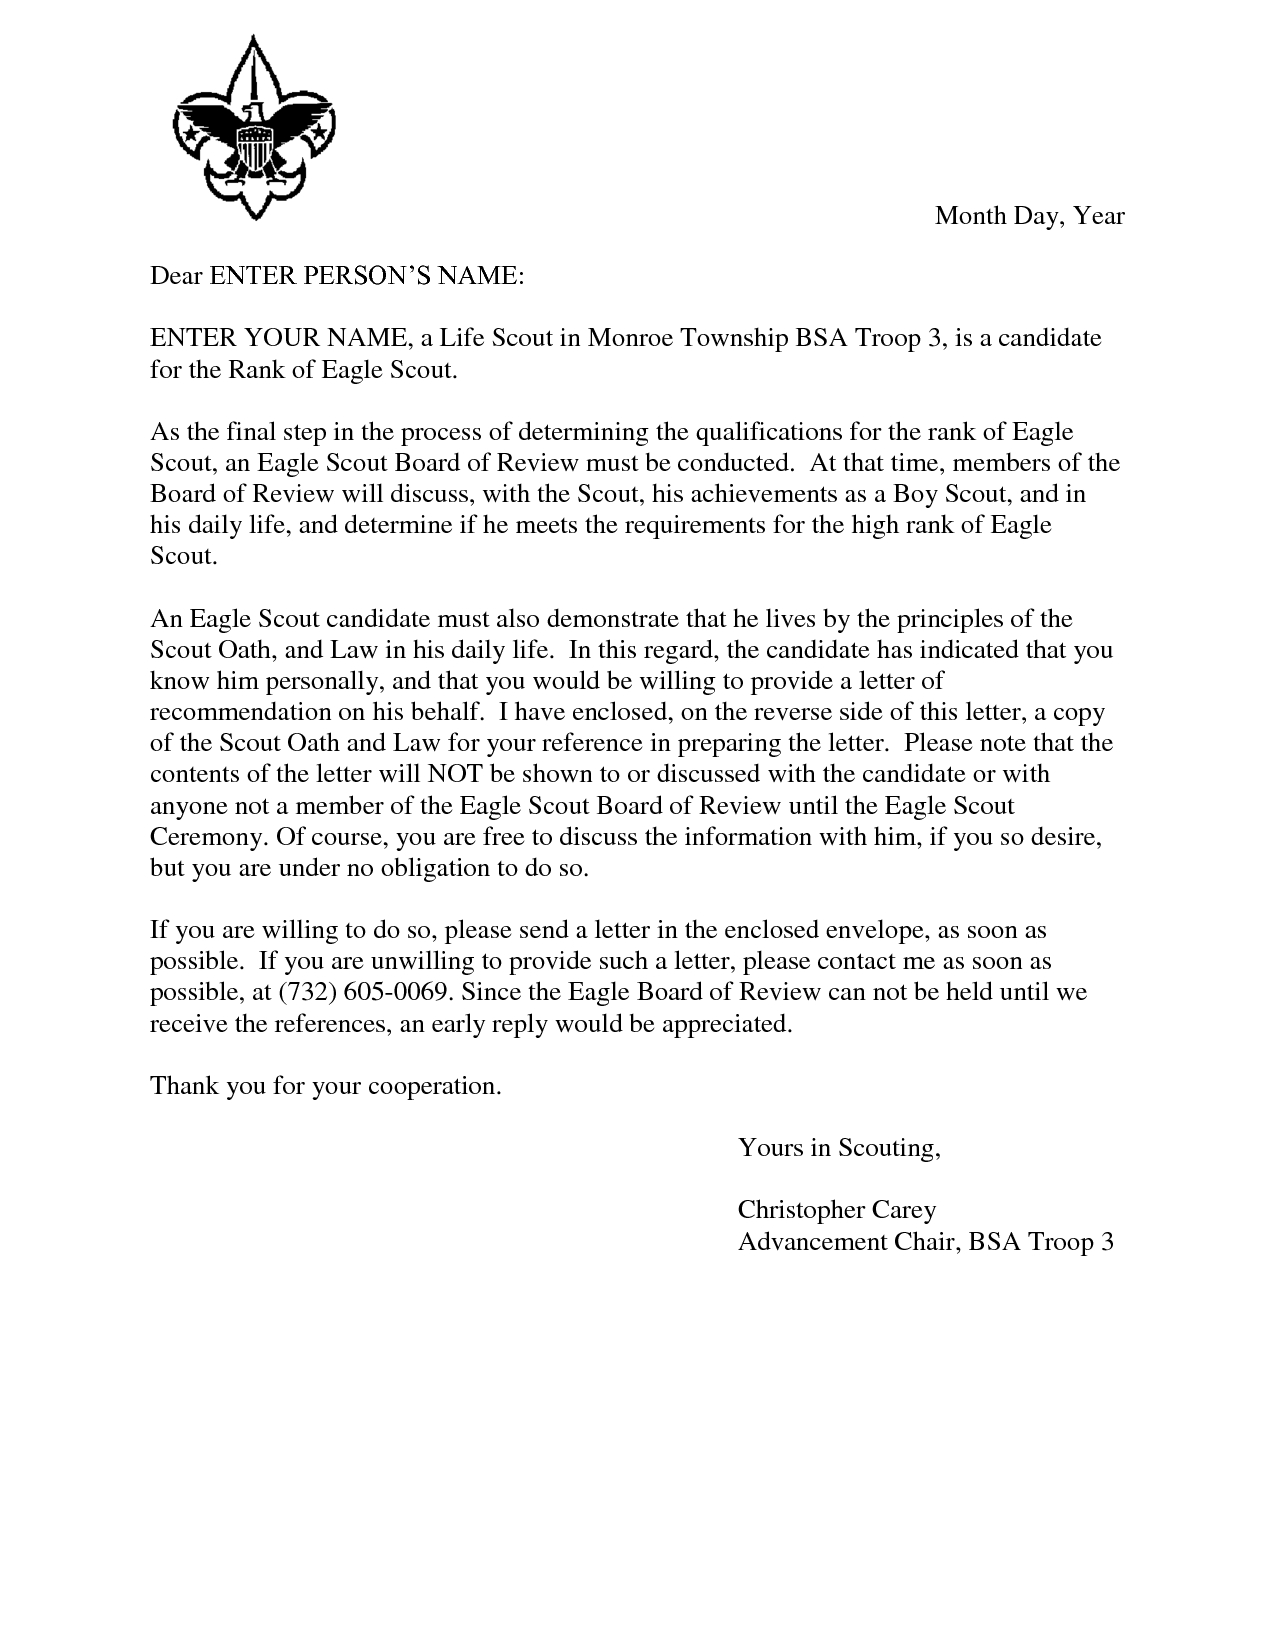 Eagle Scout Parent Letter Of Recommendation Form Debandje with regard to size 1275 X 1650